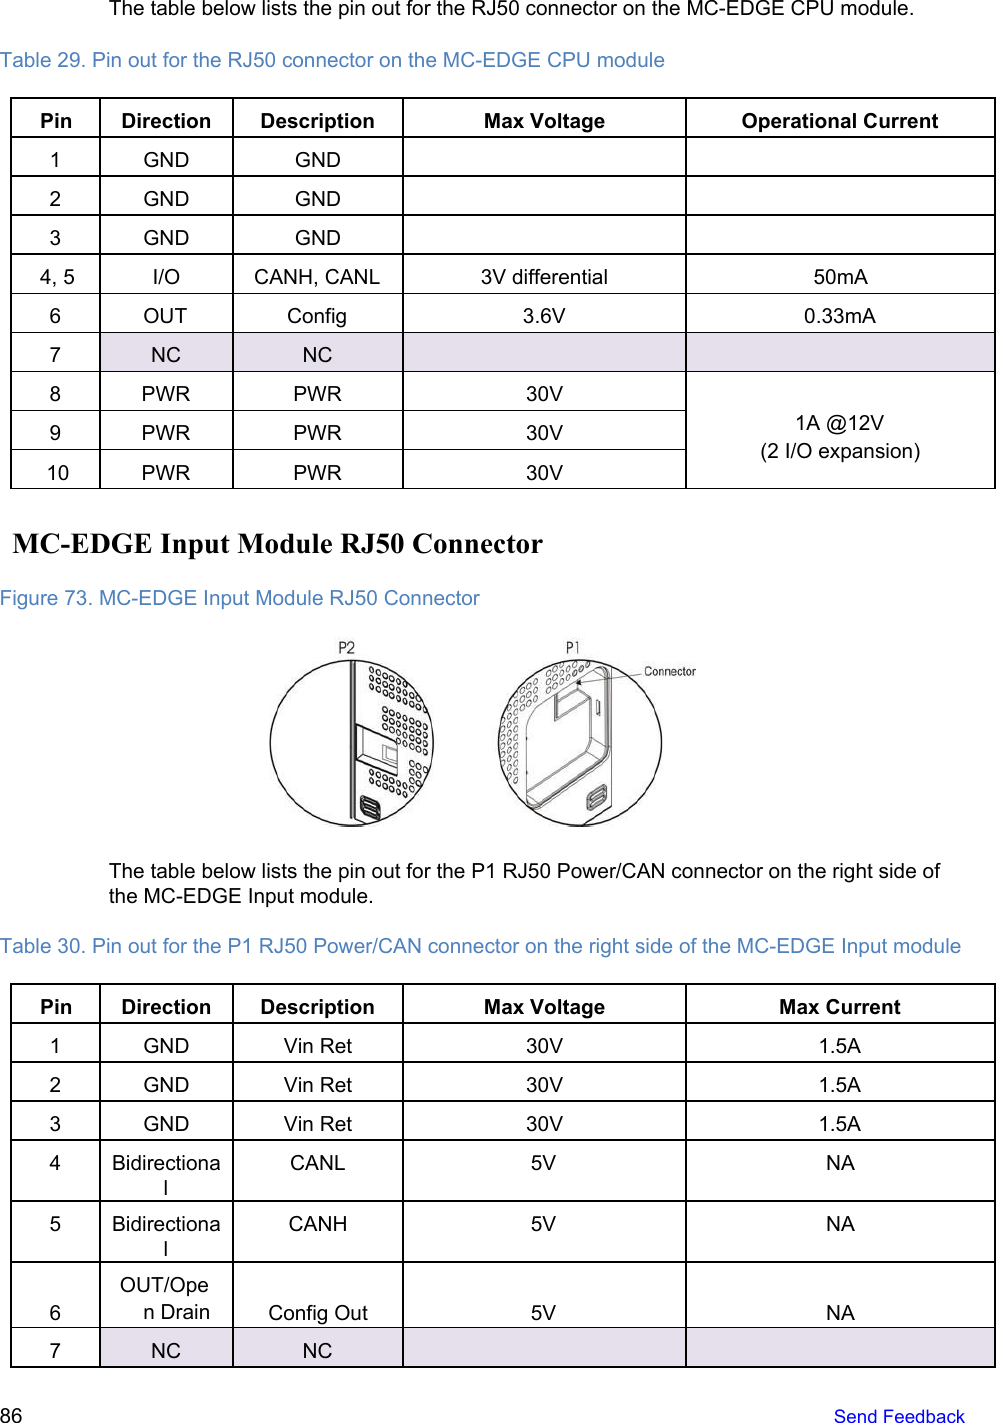  The table below lists the pin out for the RJ50 connector on the MC-EDGE CPU module. Table 29. Pin out for the RJ50 connector on the MC-EDGE CPU module Pin Direction Description Max Voltage Operational Current 1 GND GND 2 GND GND 3 GND GND 4, 5 I/O CANH, CANL 3V differential 50mA 6 OUT Config 3.6V 0.33mA 7 NC NC 8 PWR PWR 30V 1A @12V (2 I/O expansion) 9 PWR PWR 30V 10 PWR PWR 30V  MC-EDGE Input Module RJ50 Connector Figure 73. MC-EDGE Input Module RJ50 Connector  The table below lists the pin out for the P1 RJ50 Power/CAN connector on the right side of the MC-EDGE Input module. Table 30. Pin out for the P1 RJ50 Power/CAN connector on the right side of the MC-EDGE Input module Pin Direction Description Max Voltage Max Current 1 GND Vin Ret 30V 1.5A 2 GND Vin Ret 30V 1.5A 3 GND Vin Ret 30V 1.5A 4 Bidirectional CANL 5V NA 5 Bidirectional CANH 5V NA 6 OUT/Open Drain  Config Out 5V NA 7 NC NC 86   Send Feedback  